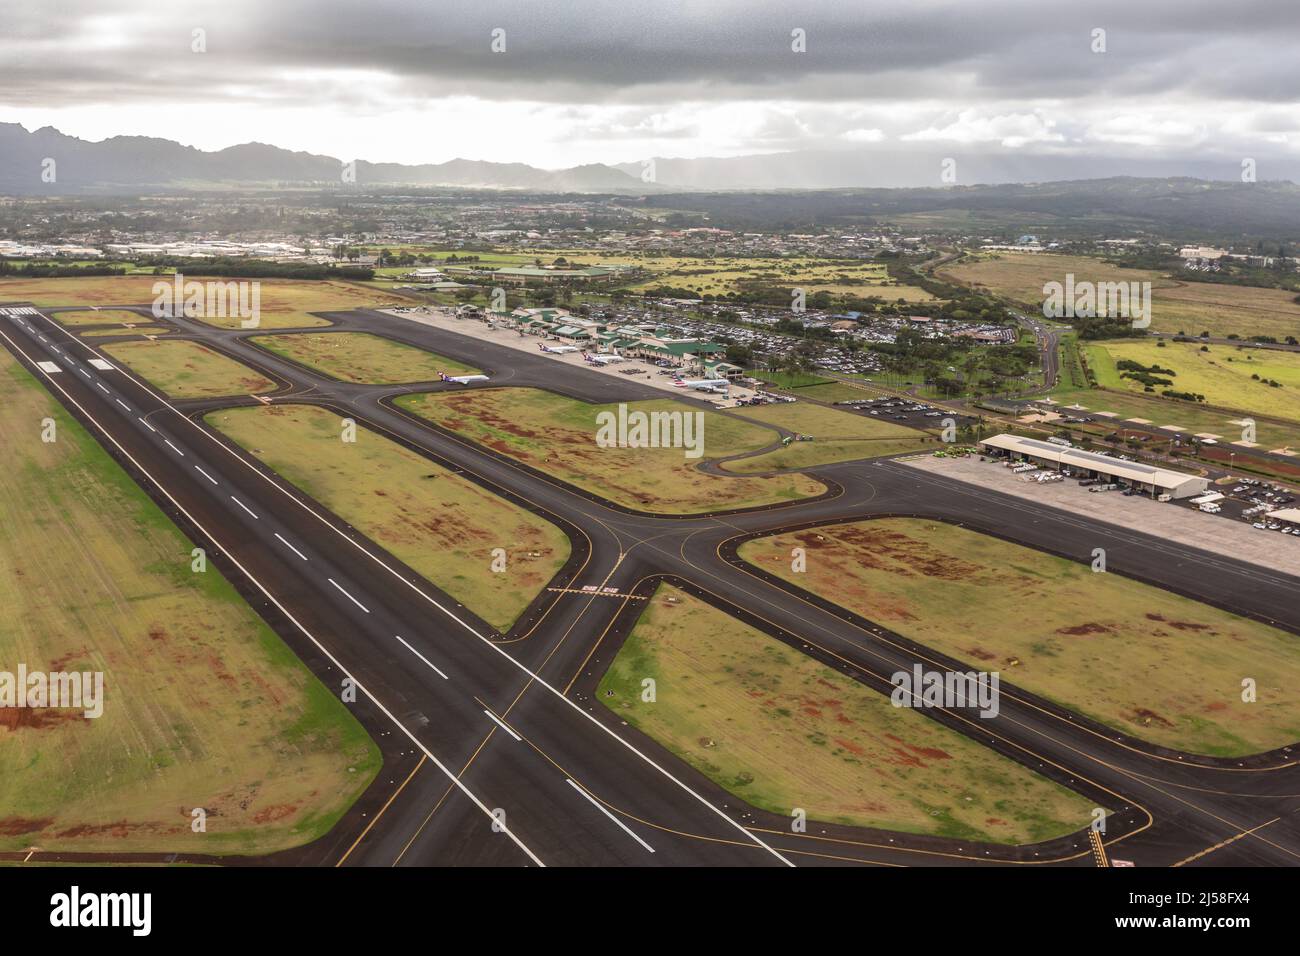 Lihue Airport services the island of Kauai, Hawaii with its commercial air service.  Scenic helicopter flights also operate from this airport. Stock Photo